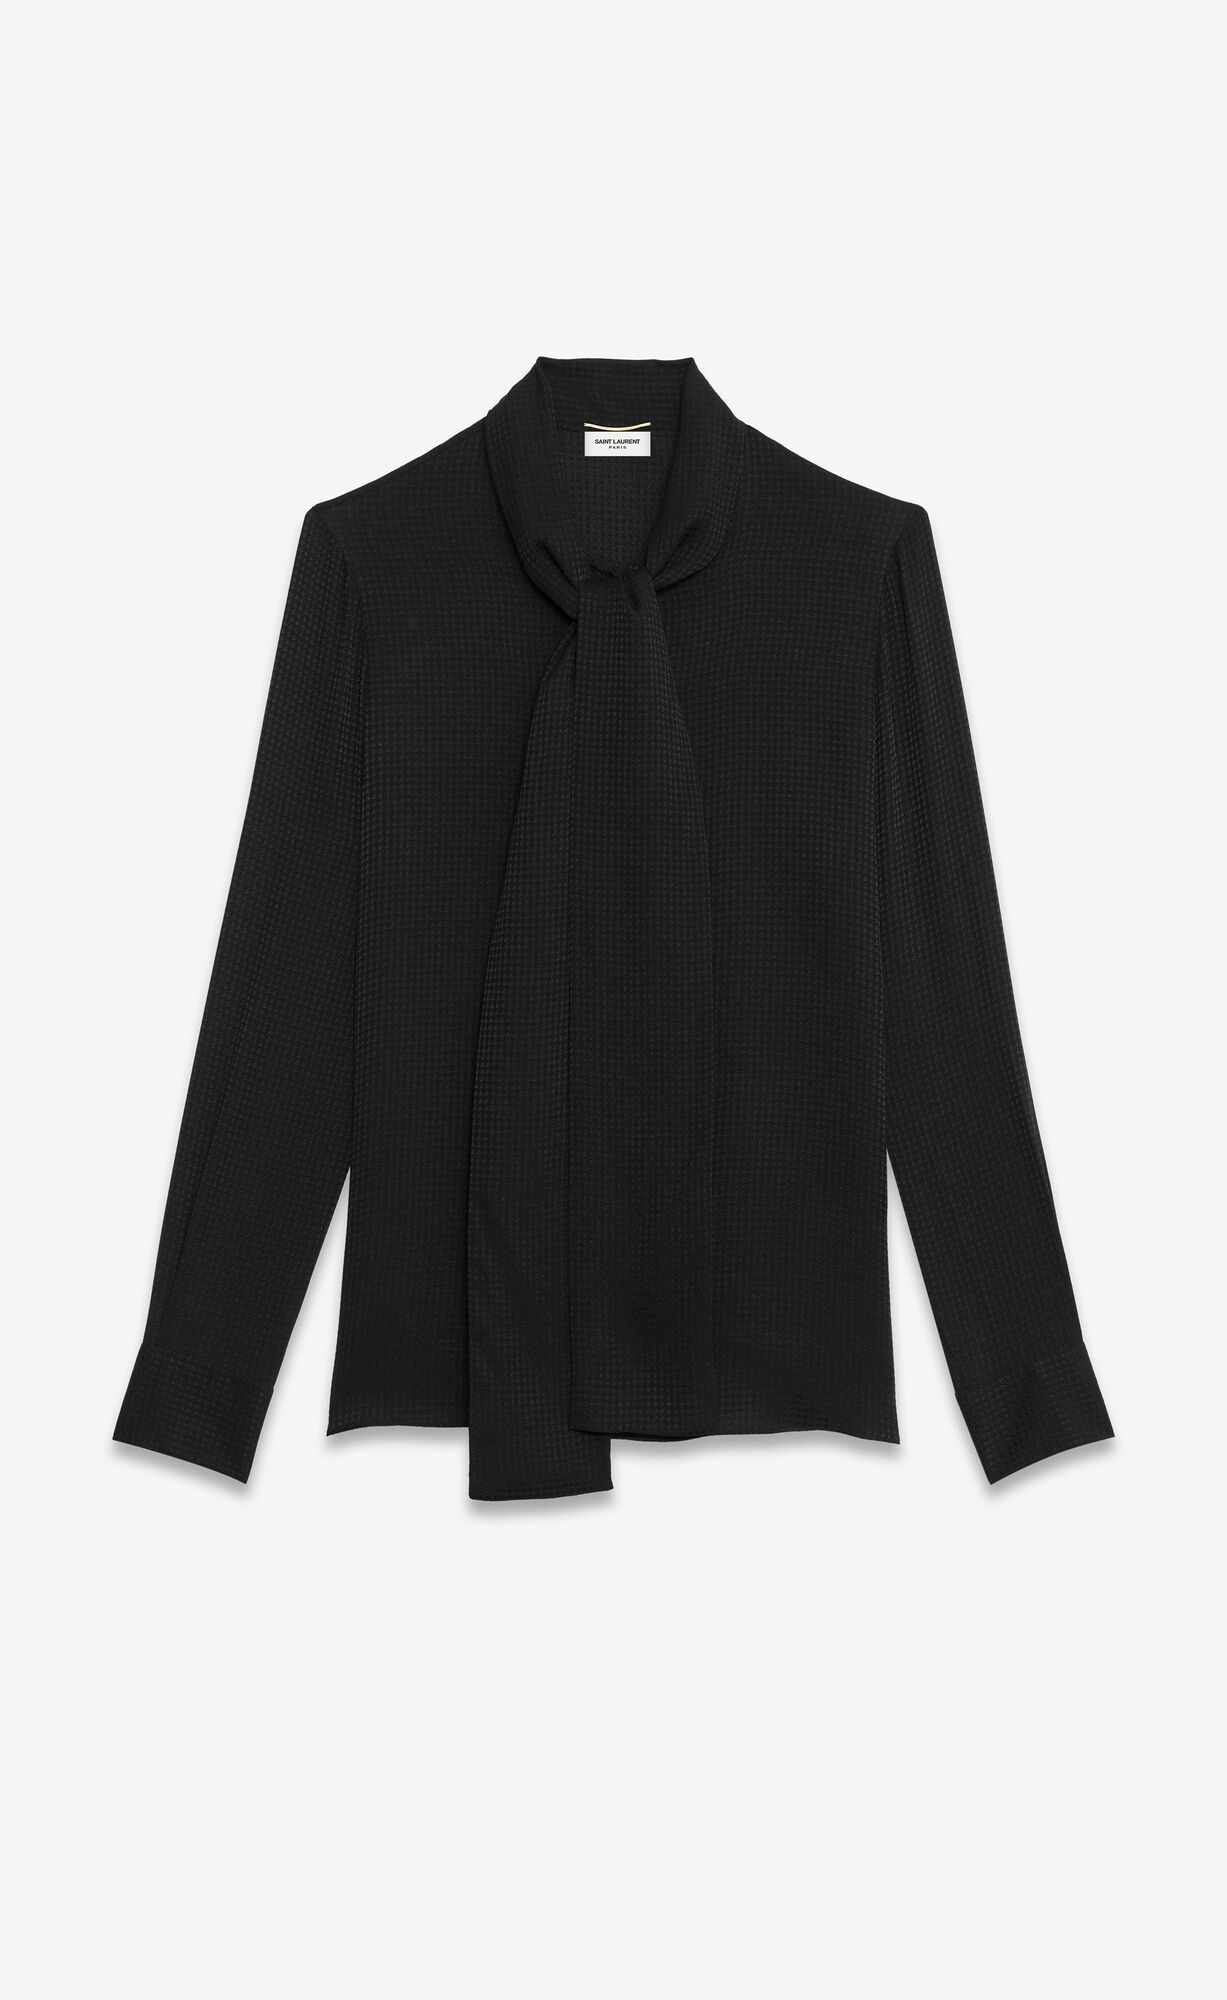 lavallière-neck blouse in shiny and matte puppytooth silk | Saint ...